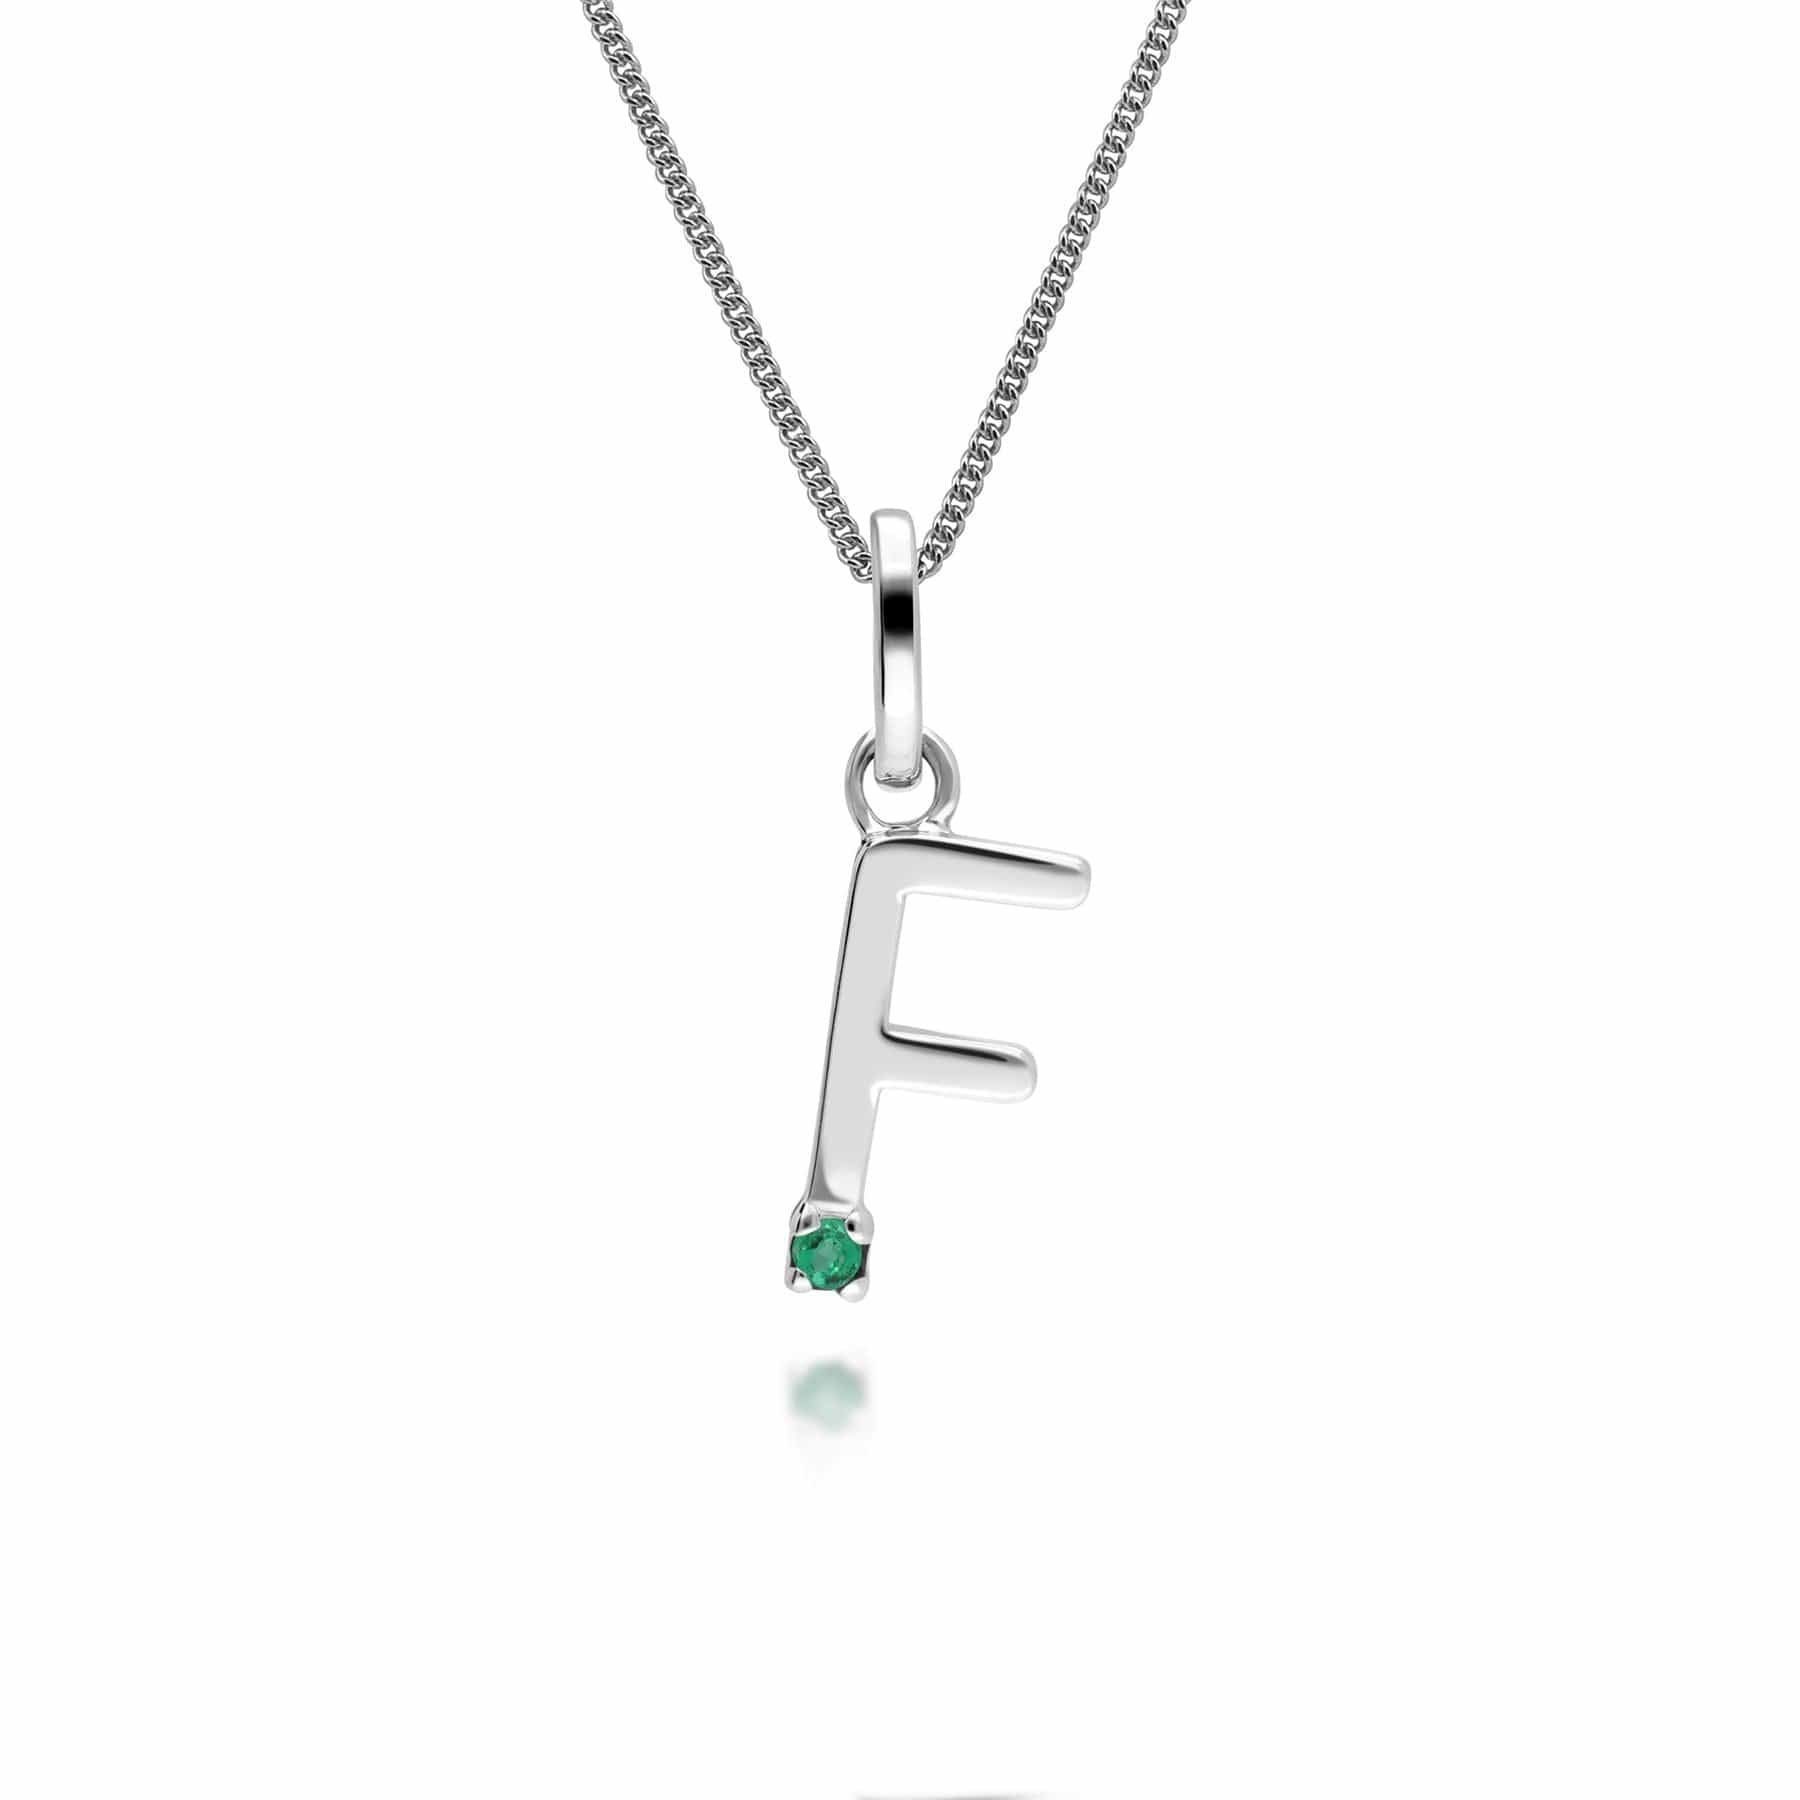 162P0257019 Initial Emerald Letter Charm Necklace in 9ct White Gold 7